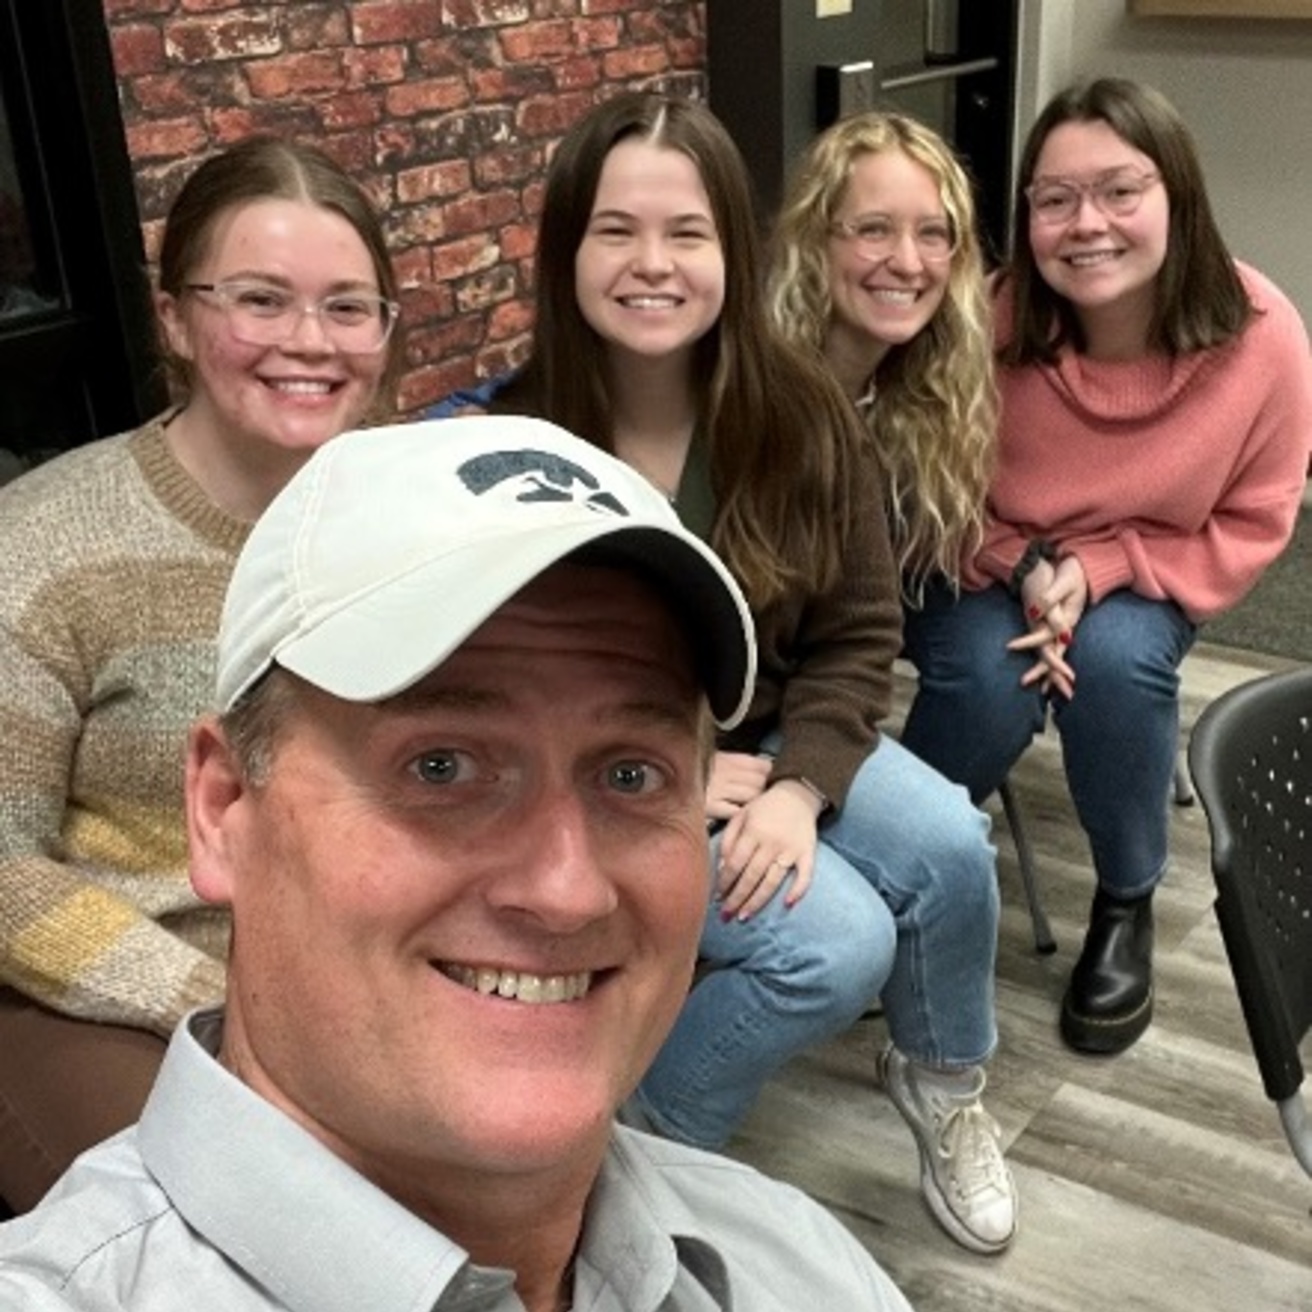 Craig Just taking selfie with 4 students